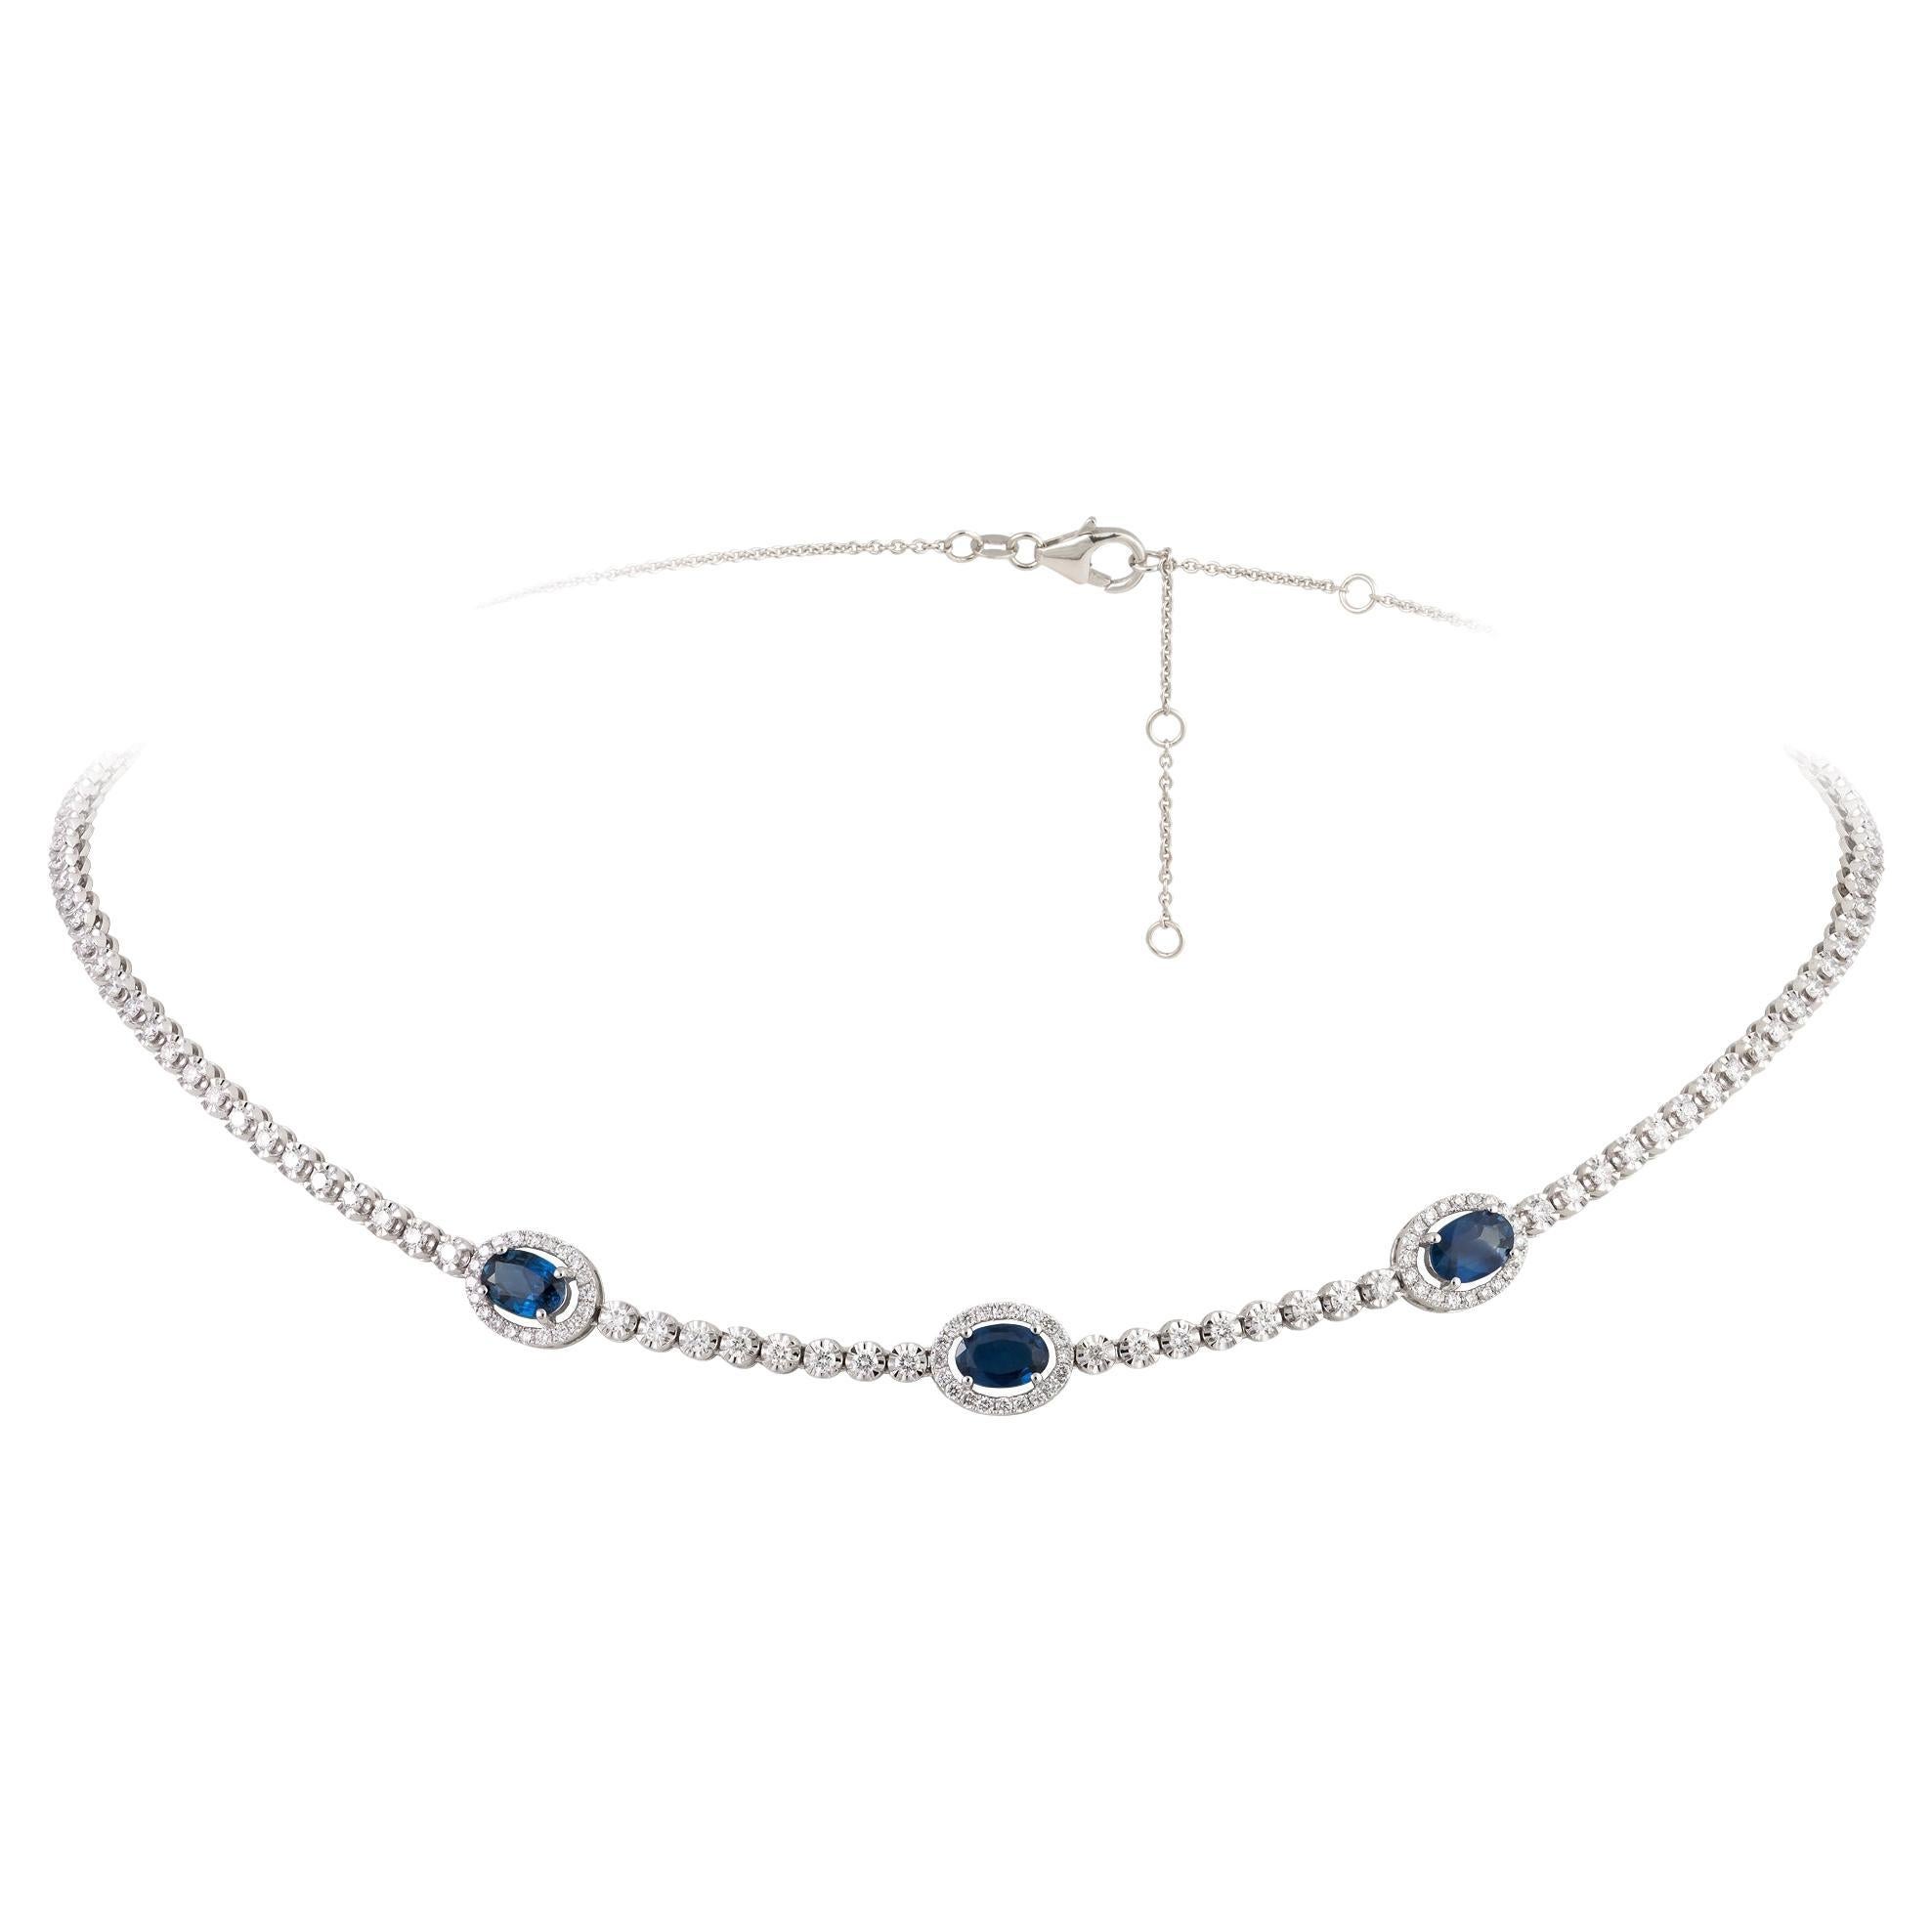 Every Day Choker White Gold 18K Necklace Blue Sapphire Diamond for Her